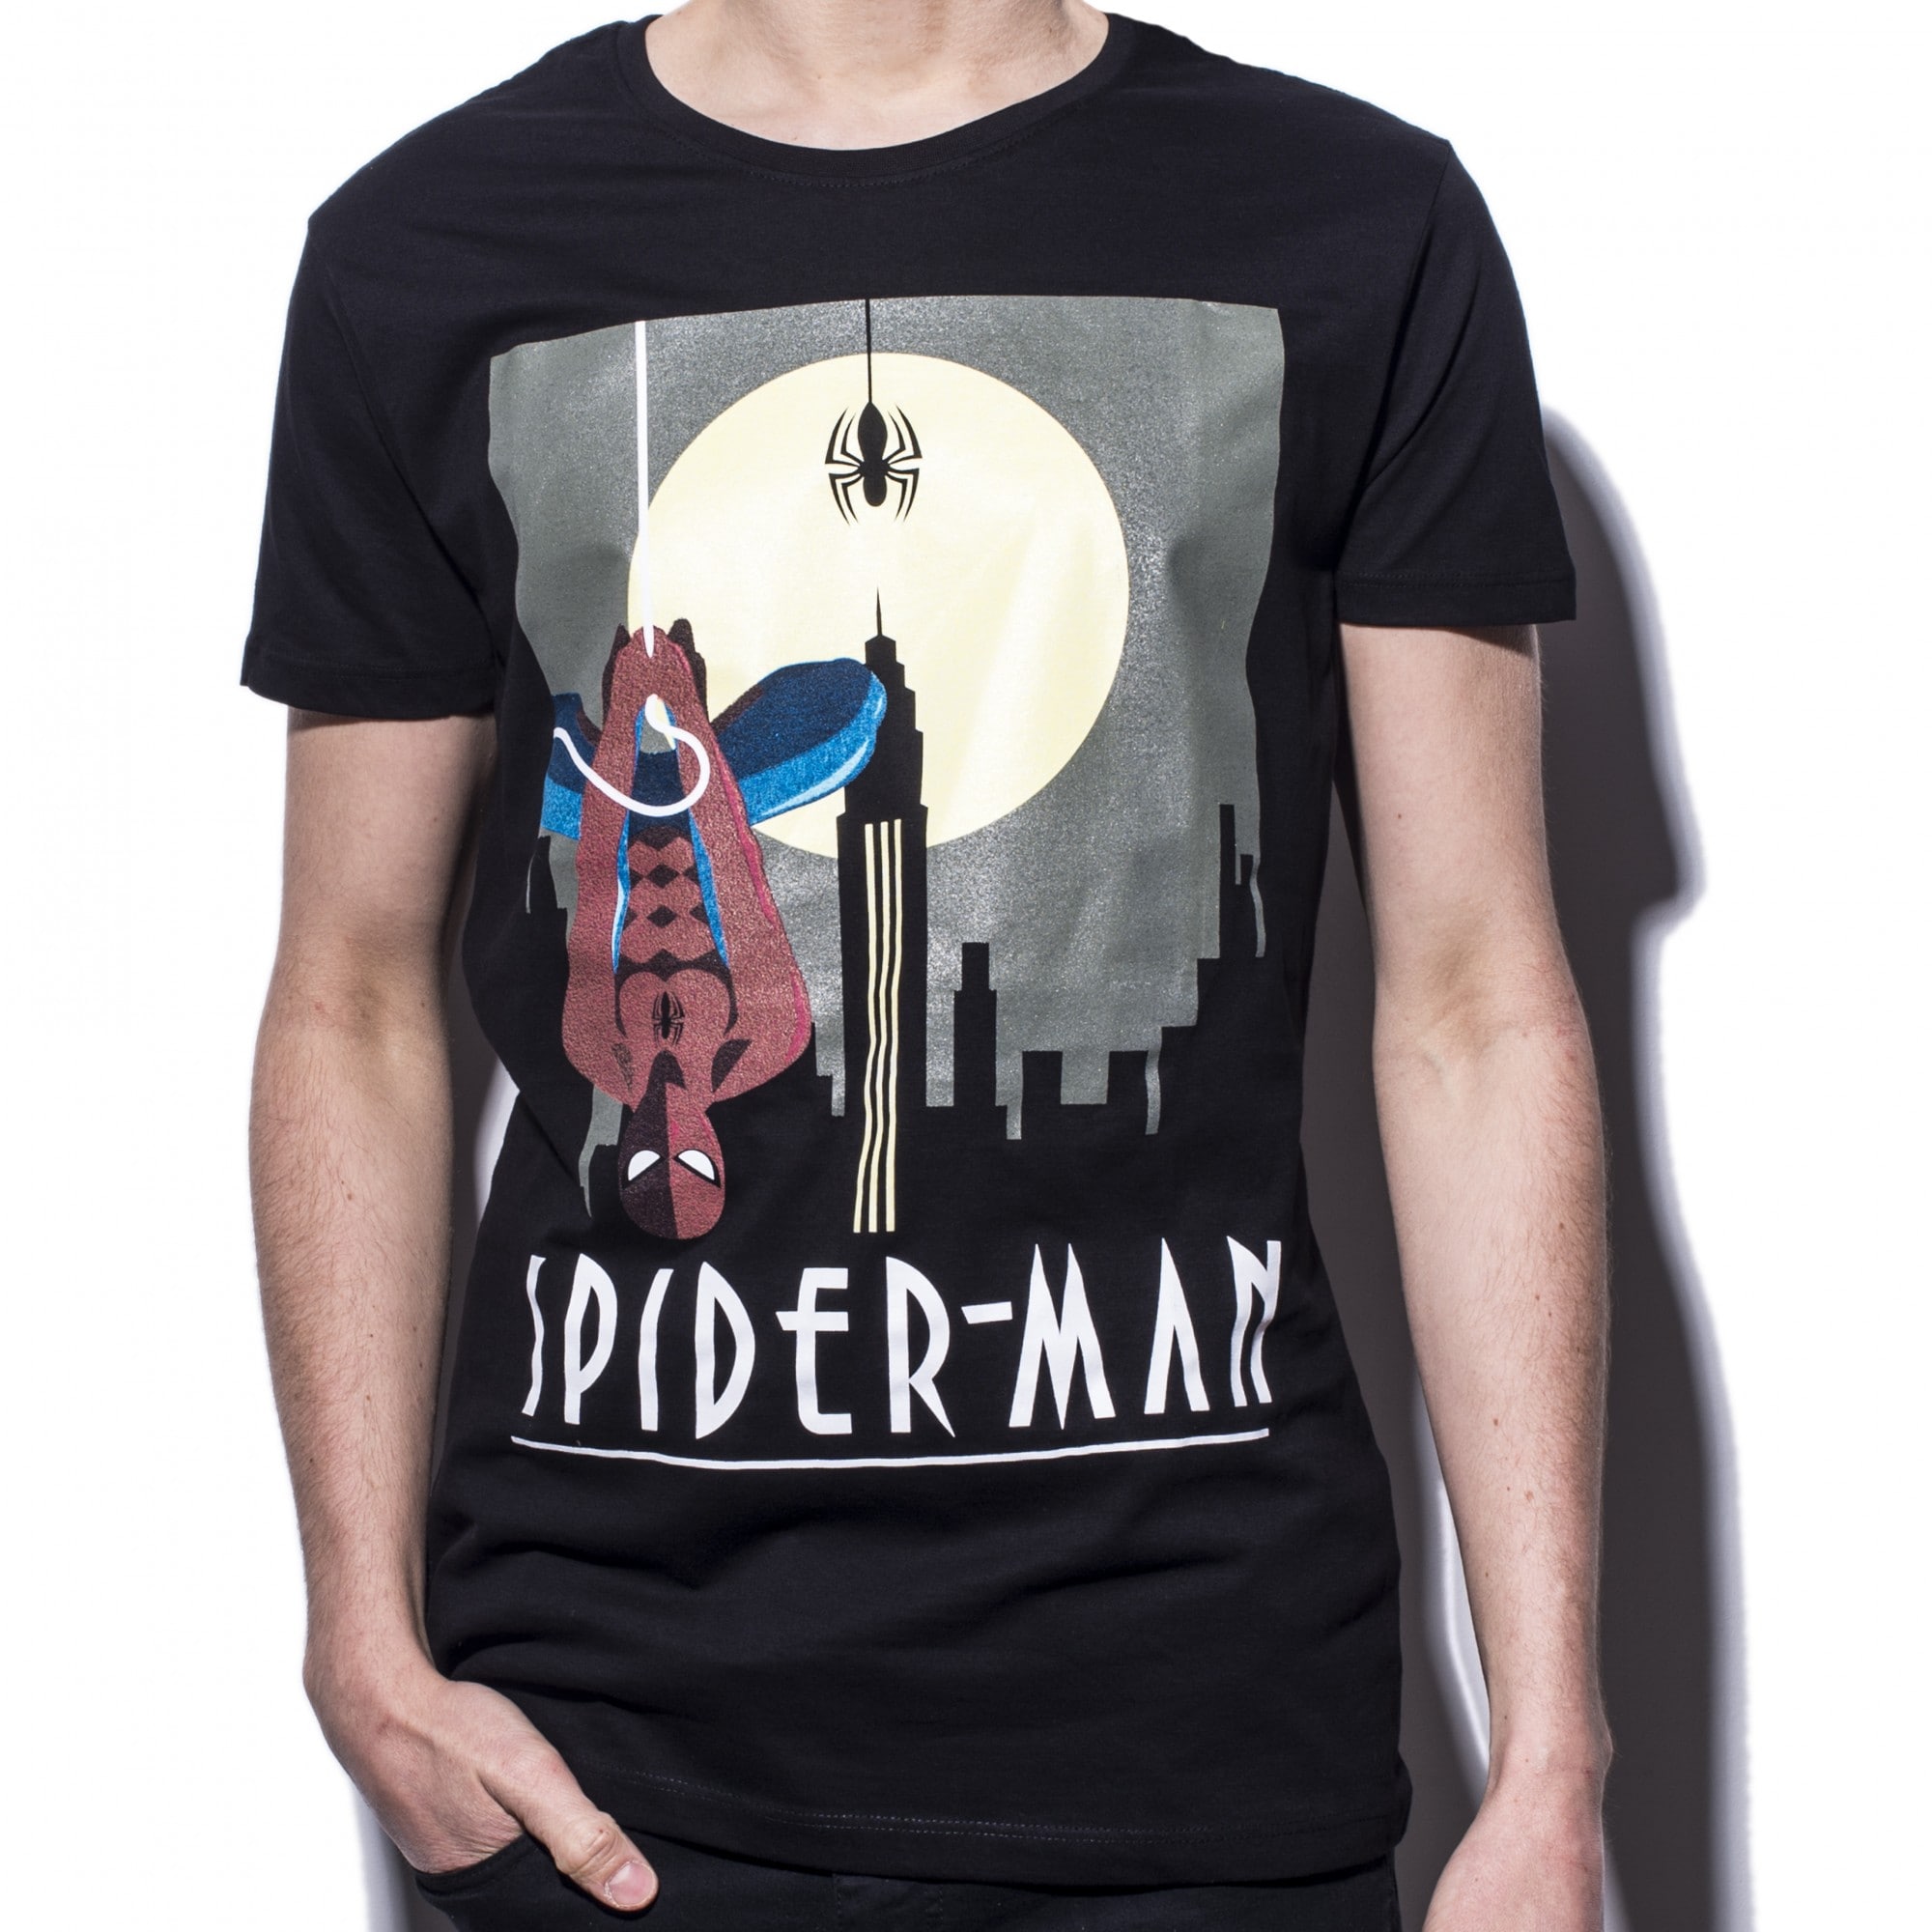 Marvel - Spiderman up side-down T-Shirt S Multi-colour - 1